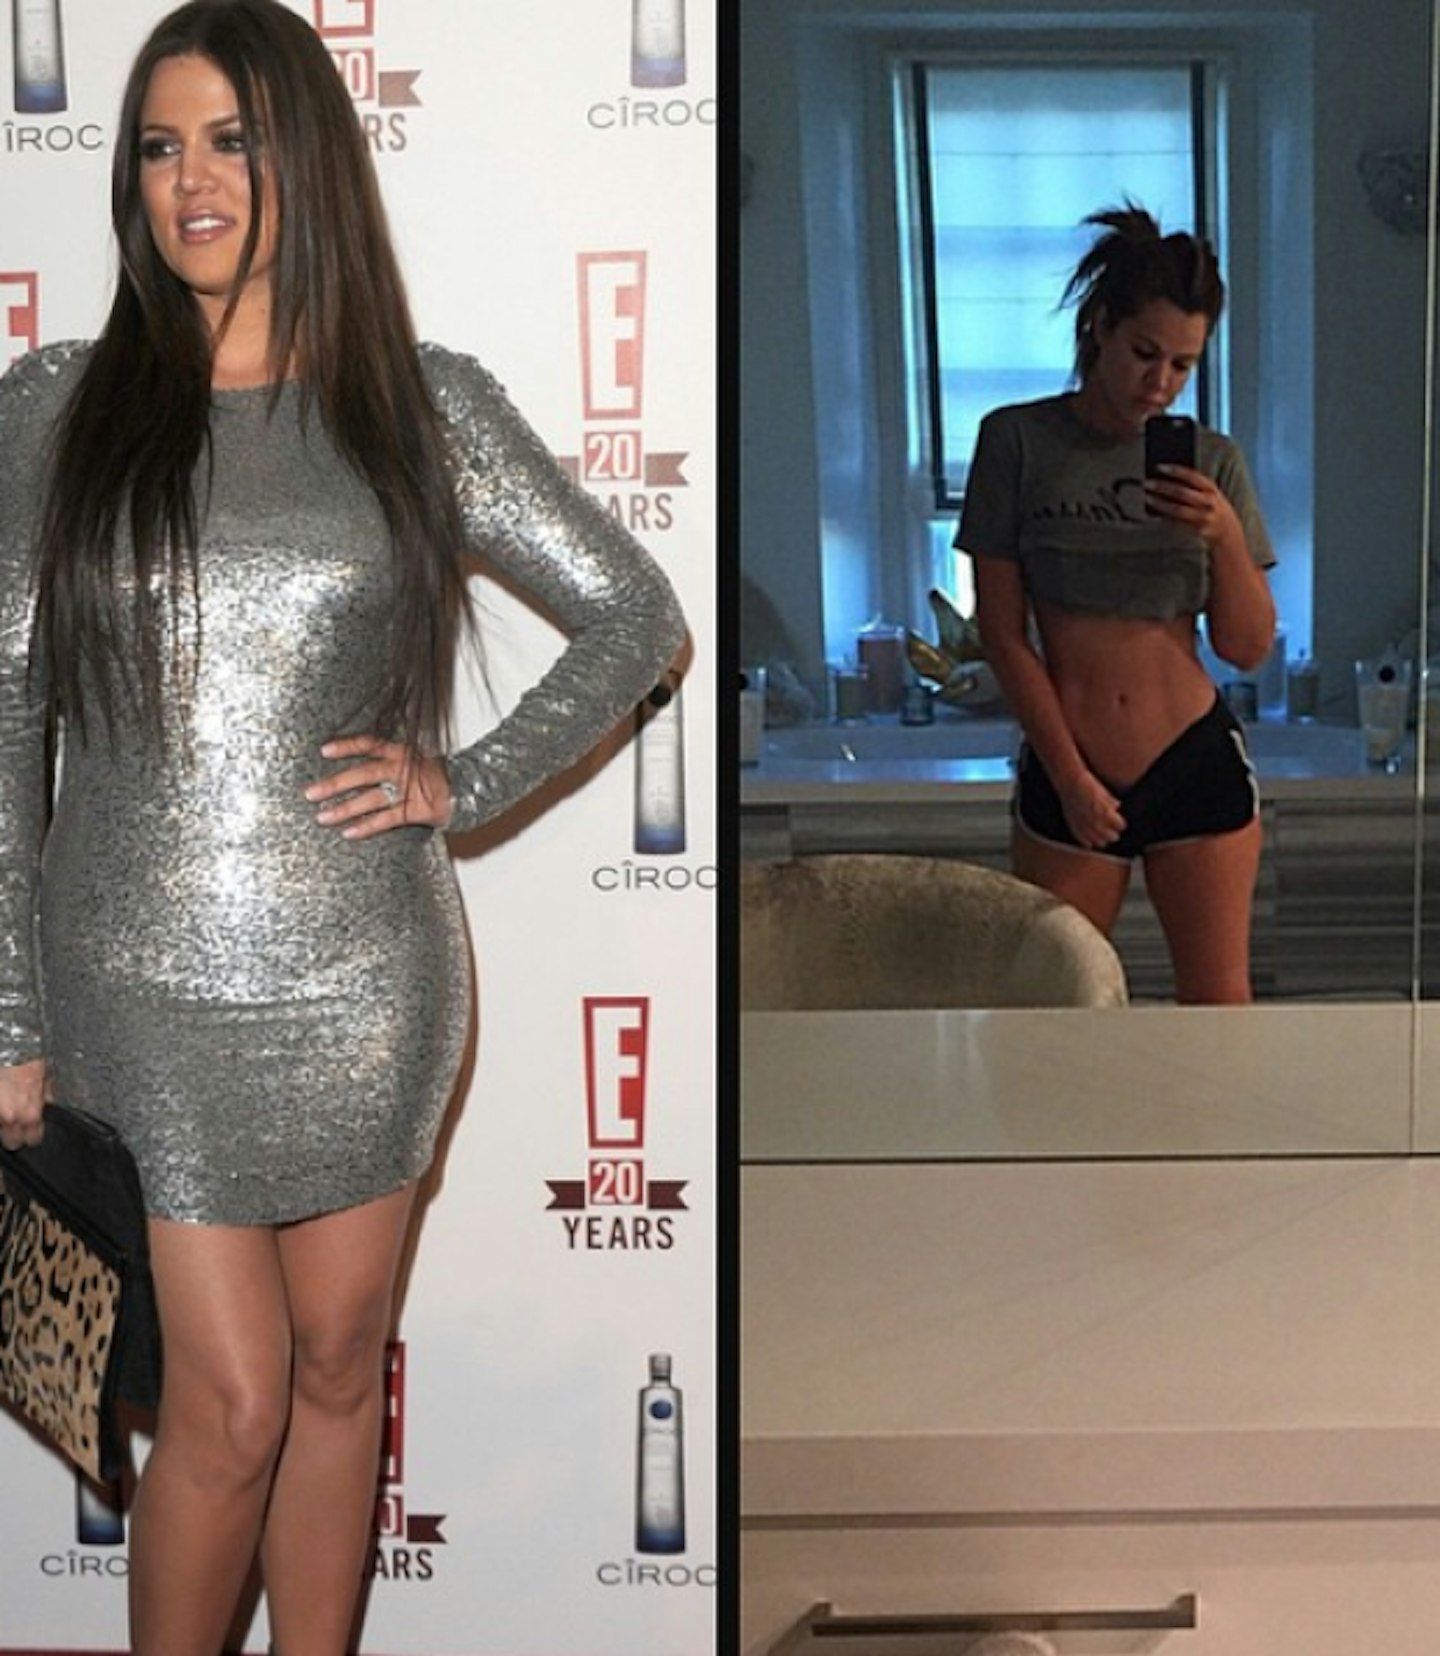 Khloe's body has changed a lot in two years